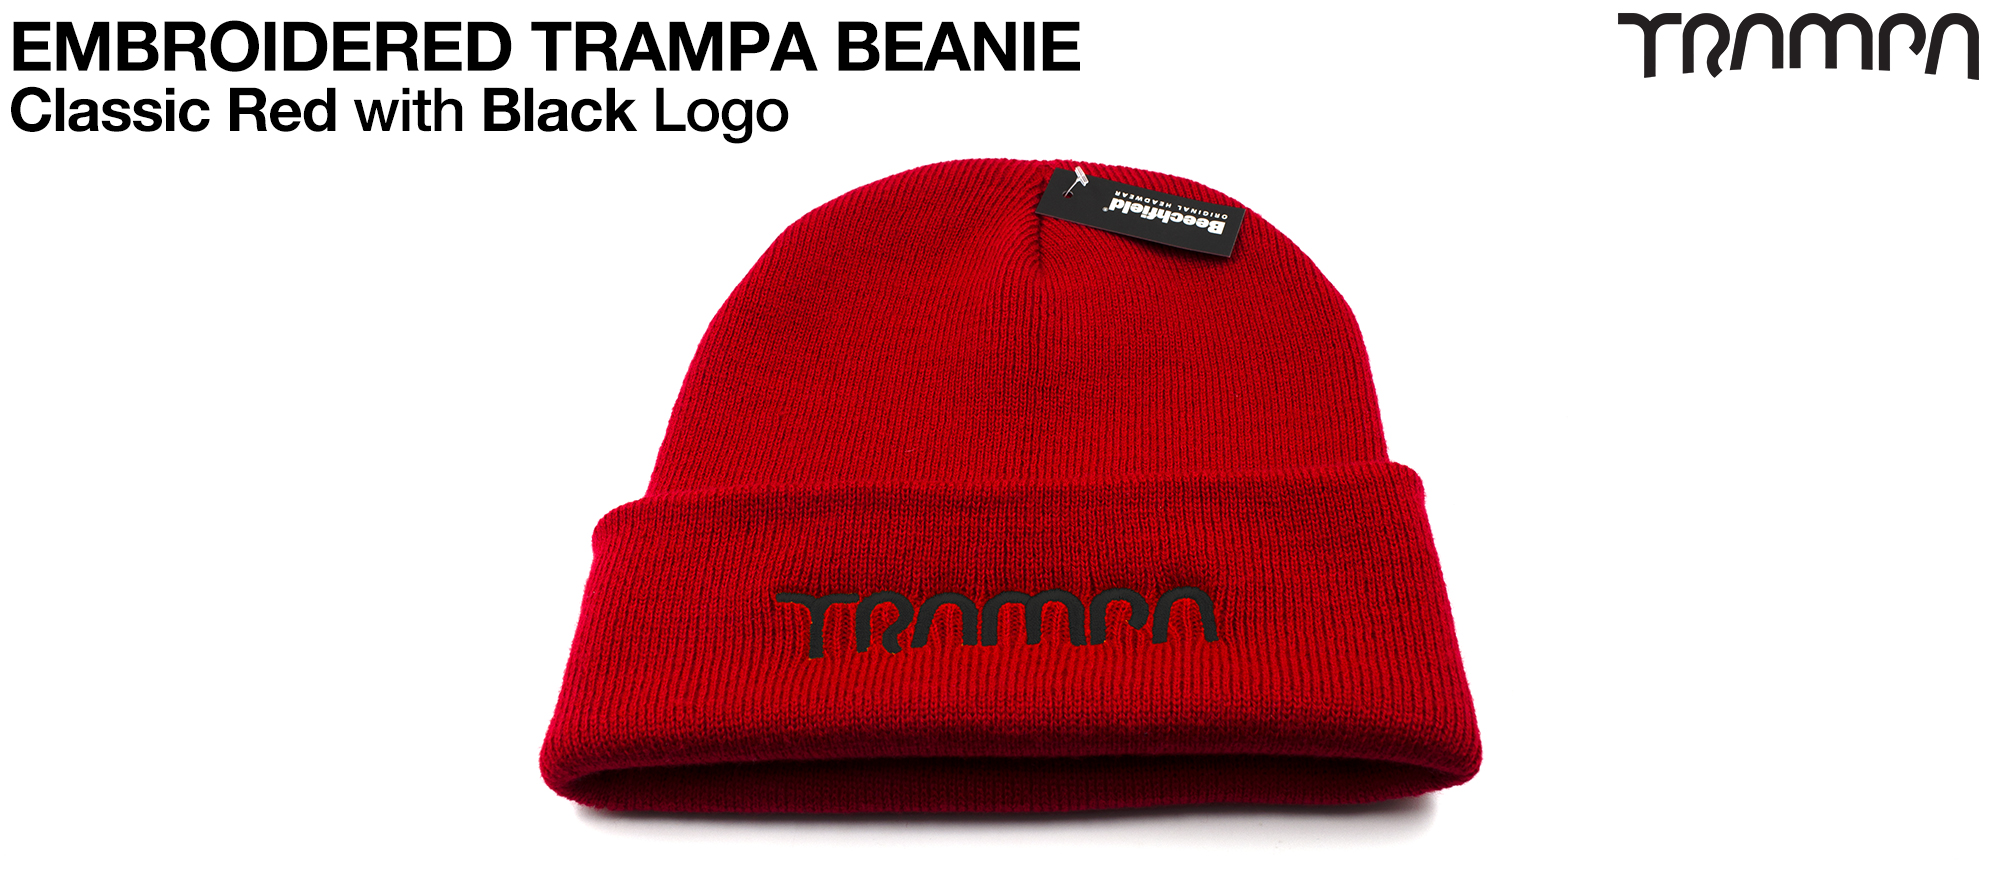 Classic RED Beanie with BLACK embroidered TRAMPA logo - Double thick turn over for extra warmth